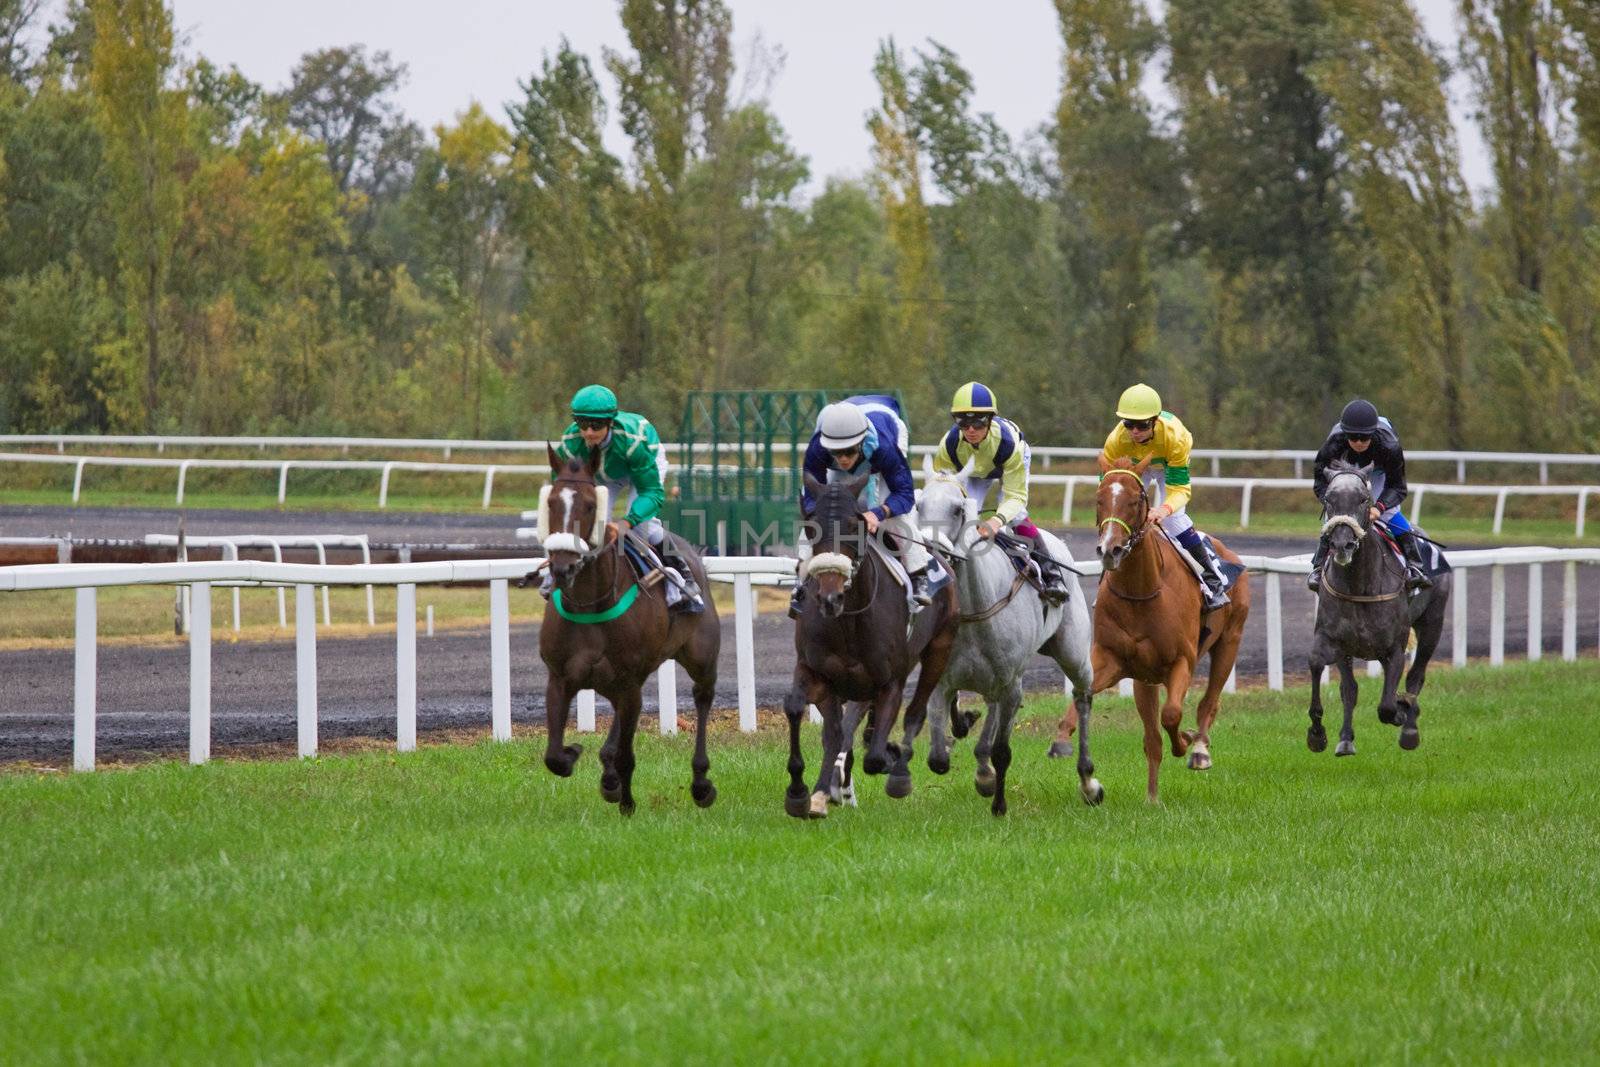 CASTERA-VERDUZAN, FRANCE - OCTOBER 4: The leaders in the home straight in a race at the Baron hippodrome Castera Verduzan, France on October 4, 2010